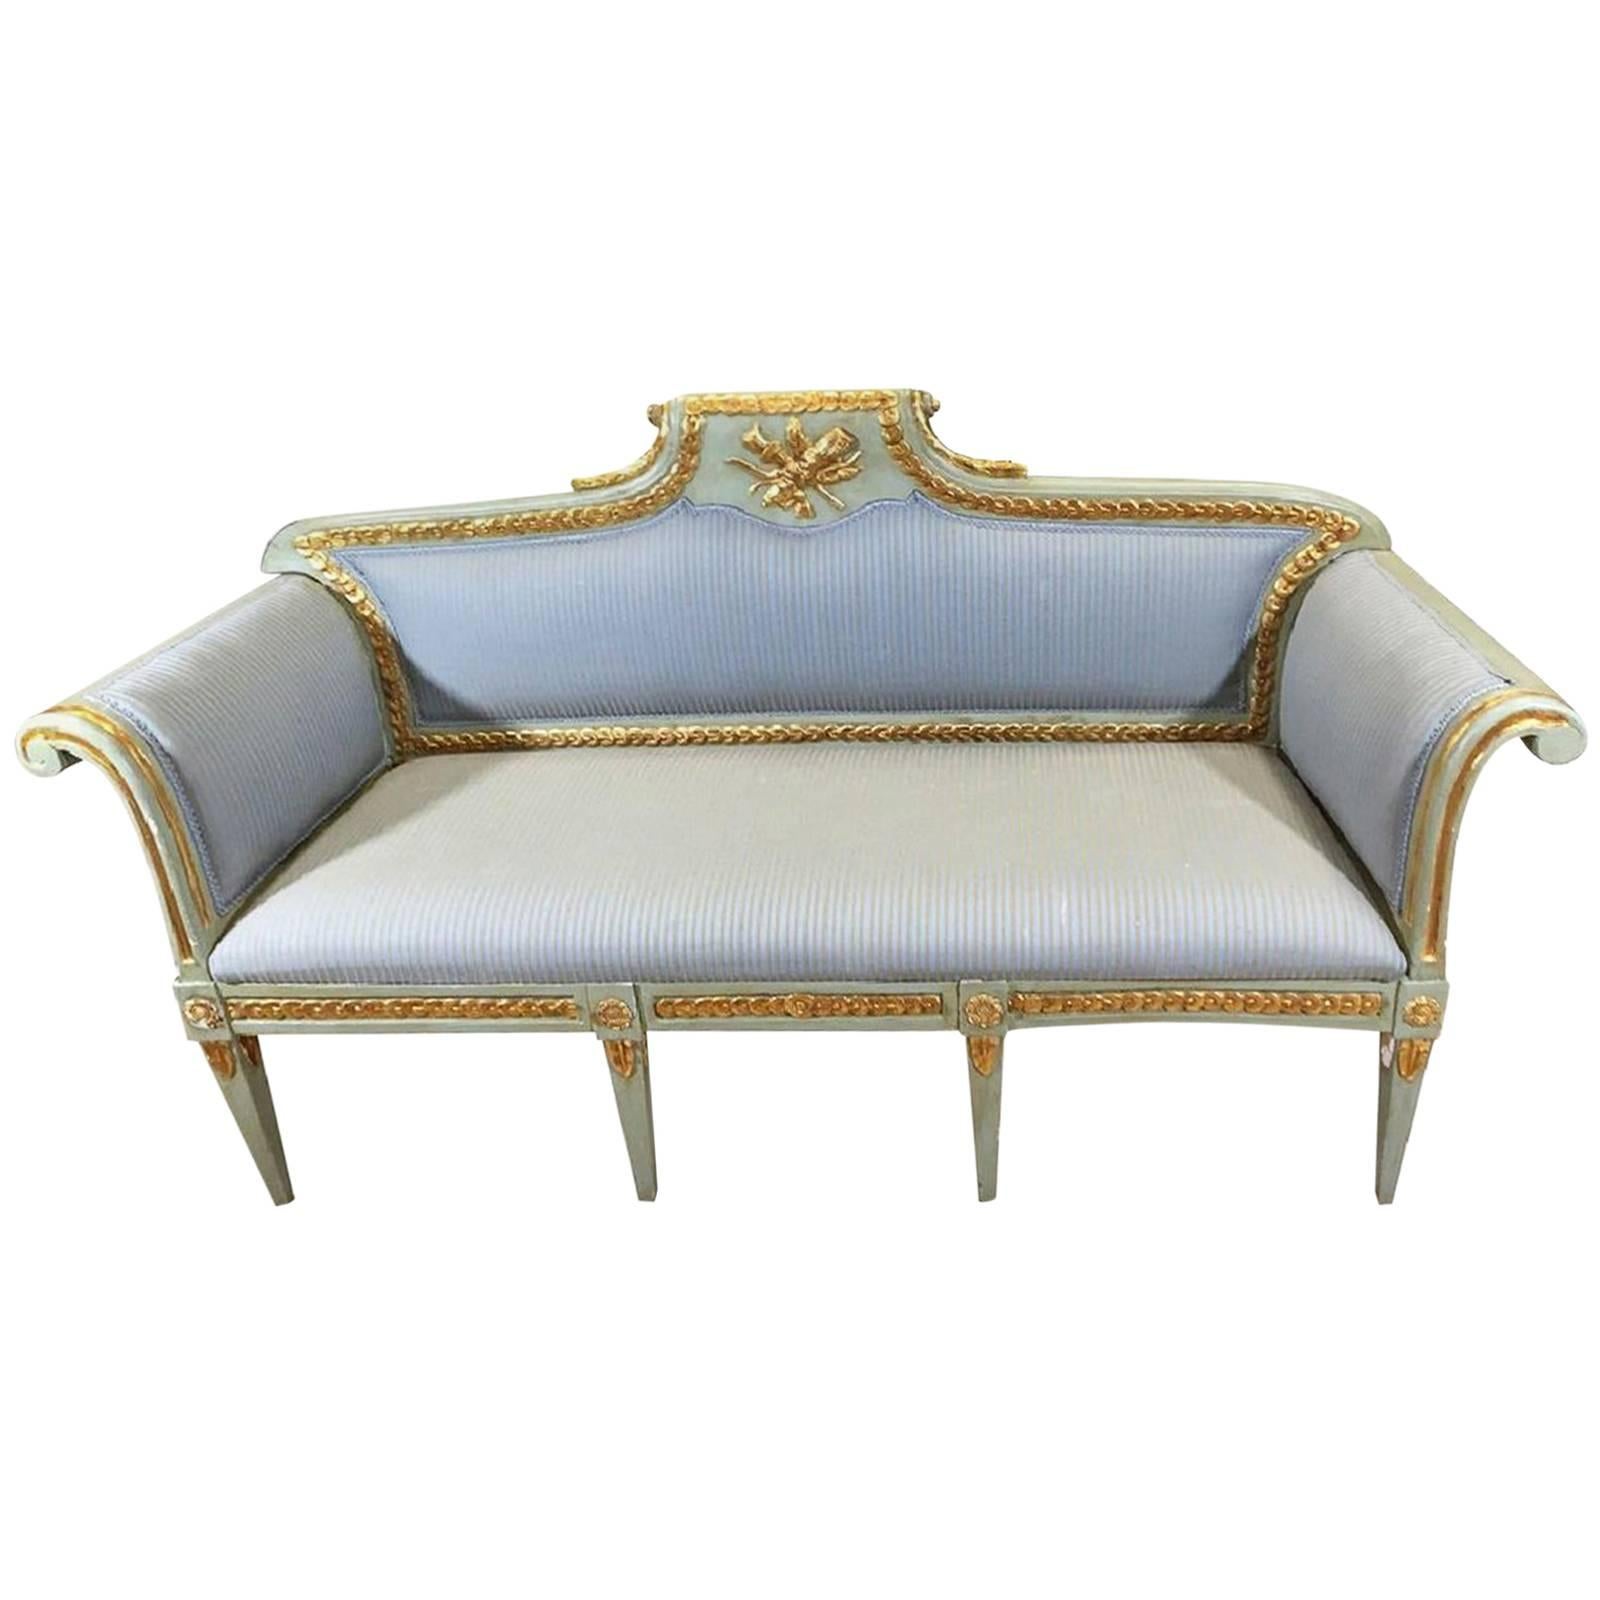 Italian Venetian Painted Sofa or Settee with Gold Gilt Highlights, 18th Century